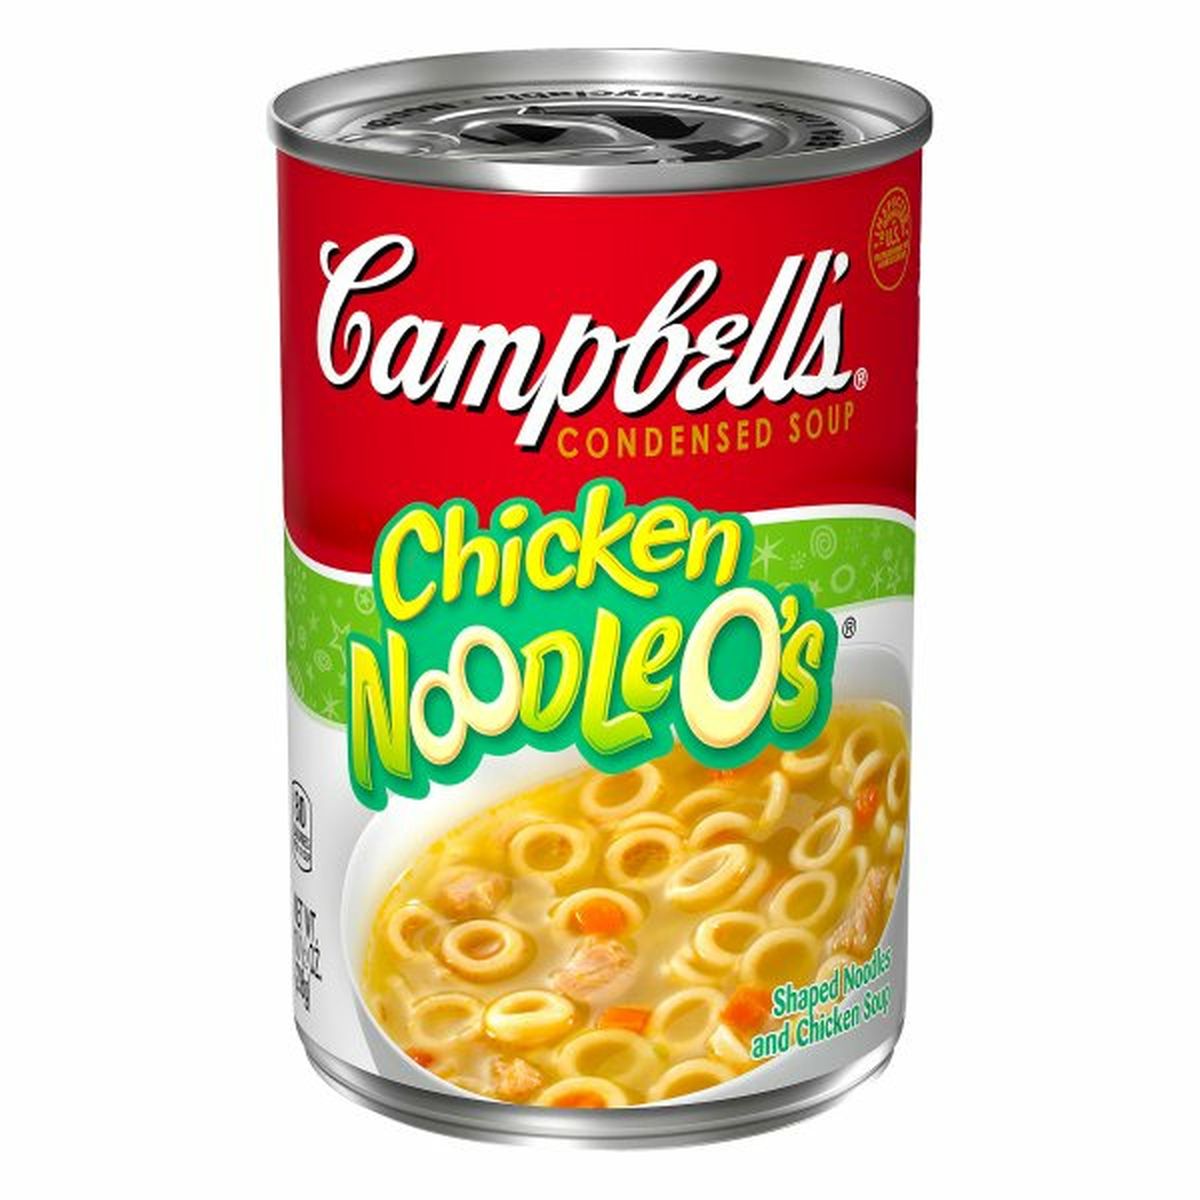 Calories in Campbell'ss Soup, Condensed, Chicken Noodle O's